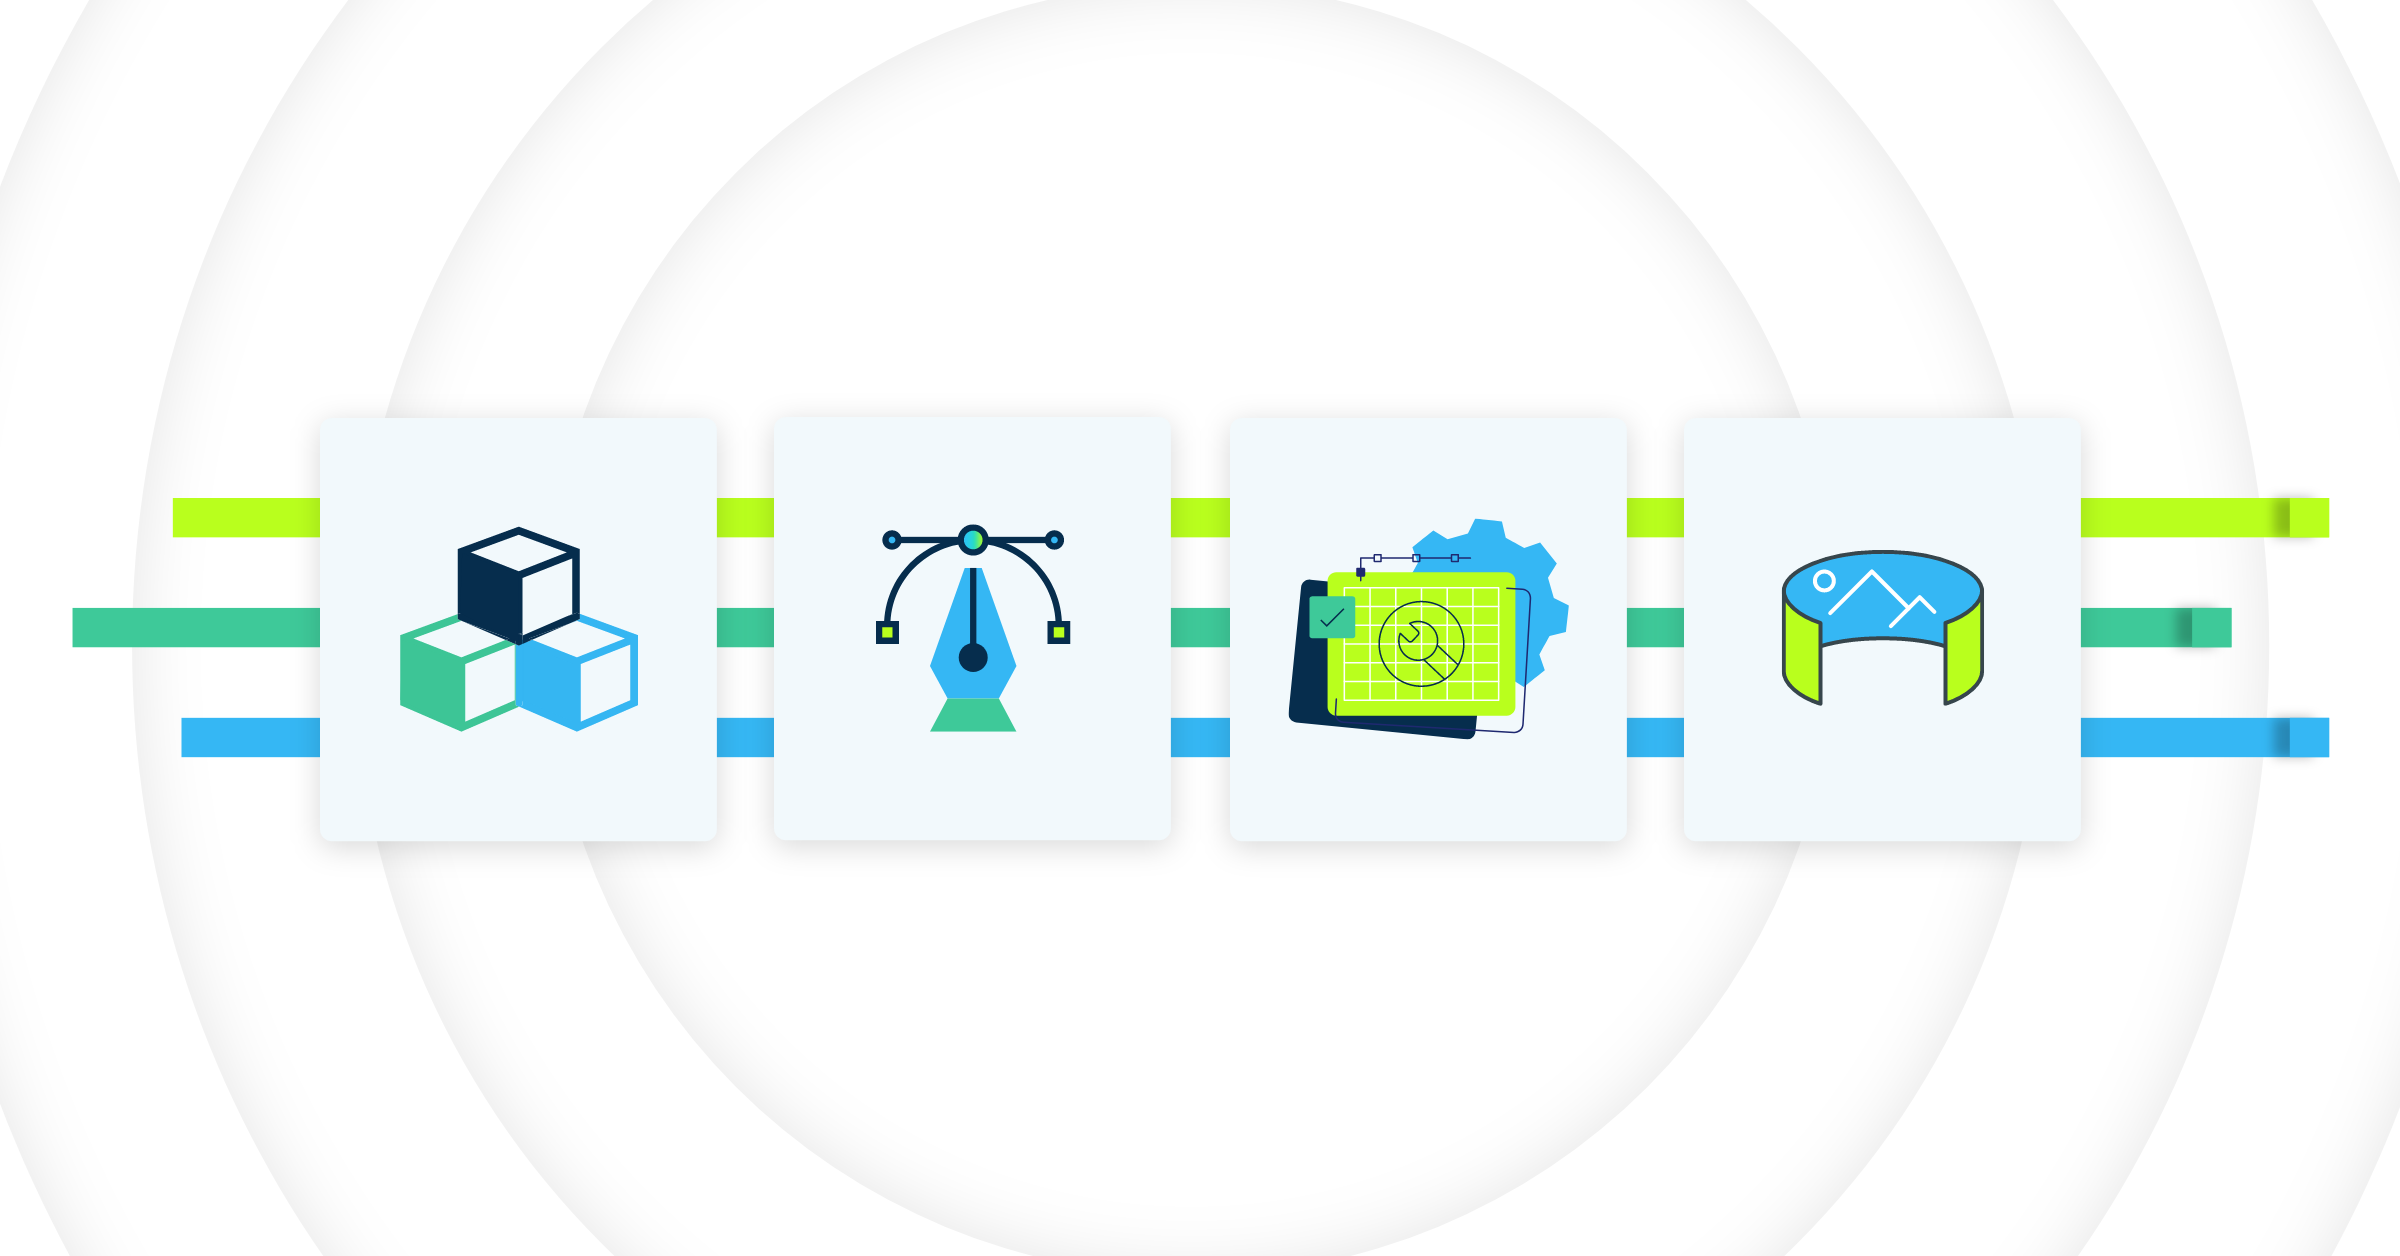 Design images and icons representing design files that should be backed up with endpoint backup solutions.